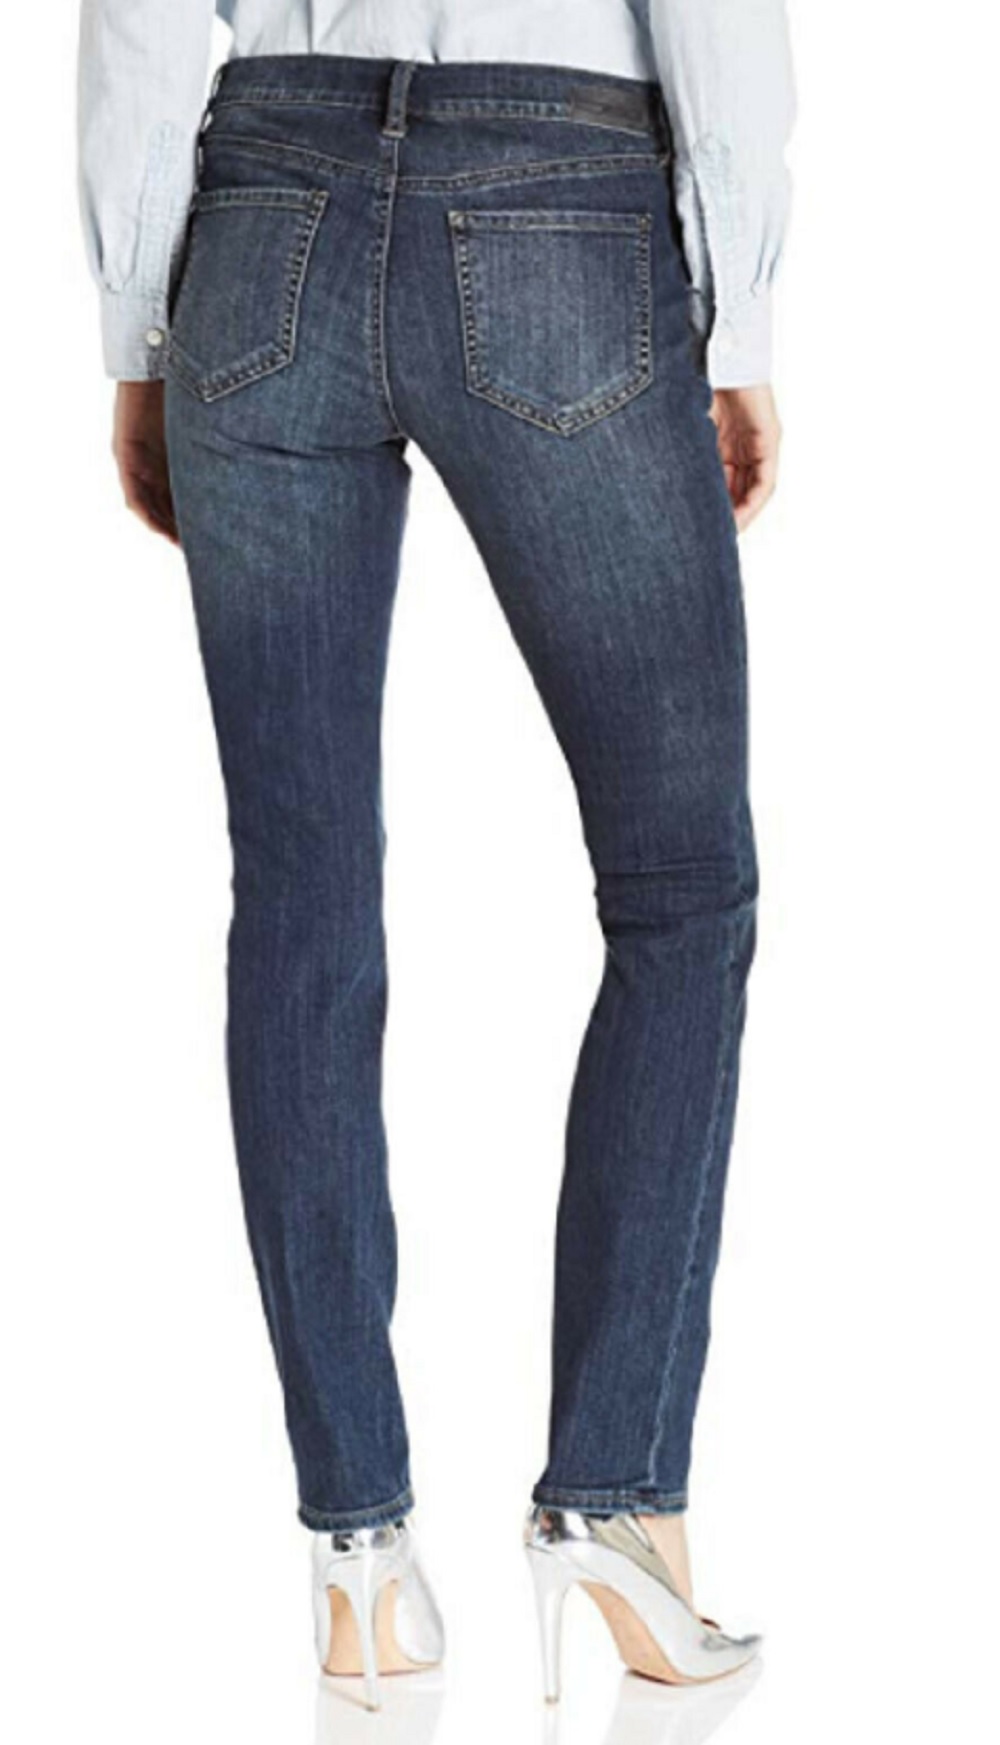 DKNY Jeans Ladies' Soho Classic Skinny Jeans Chelsea Wash (4x30) - image 2 of 2